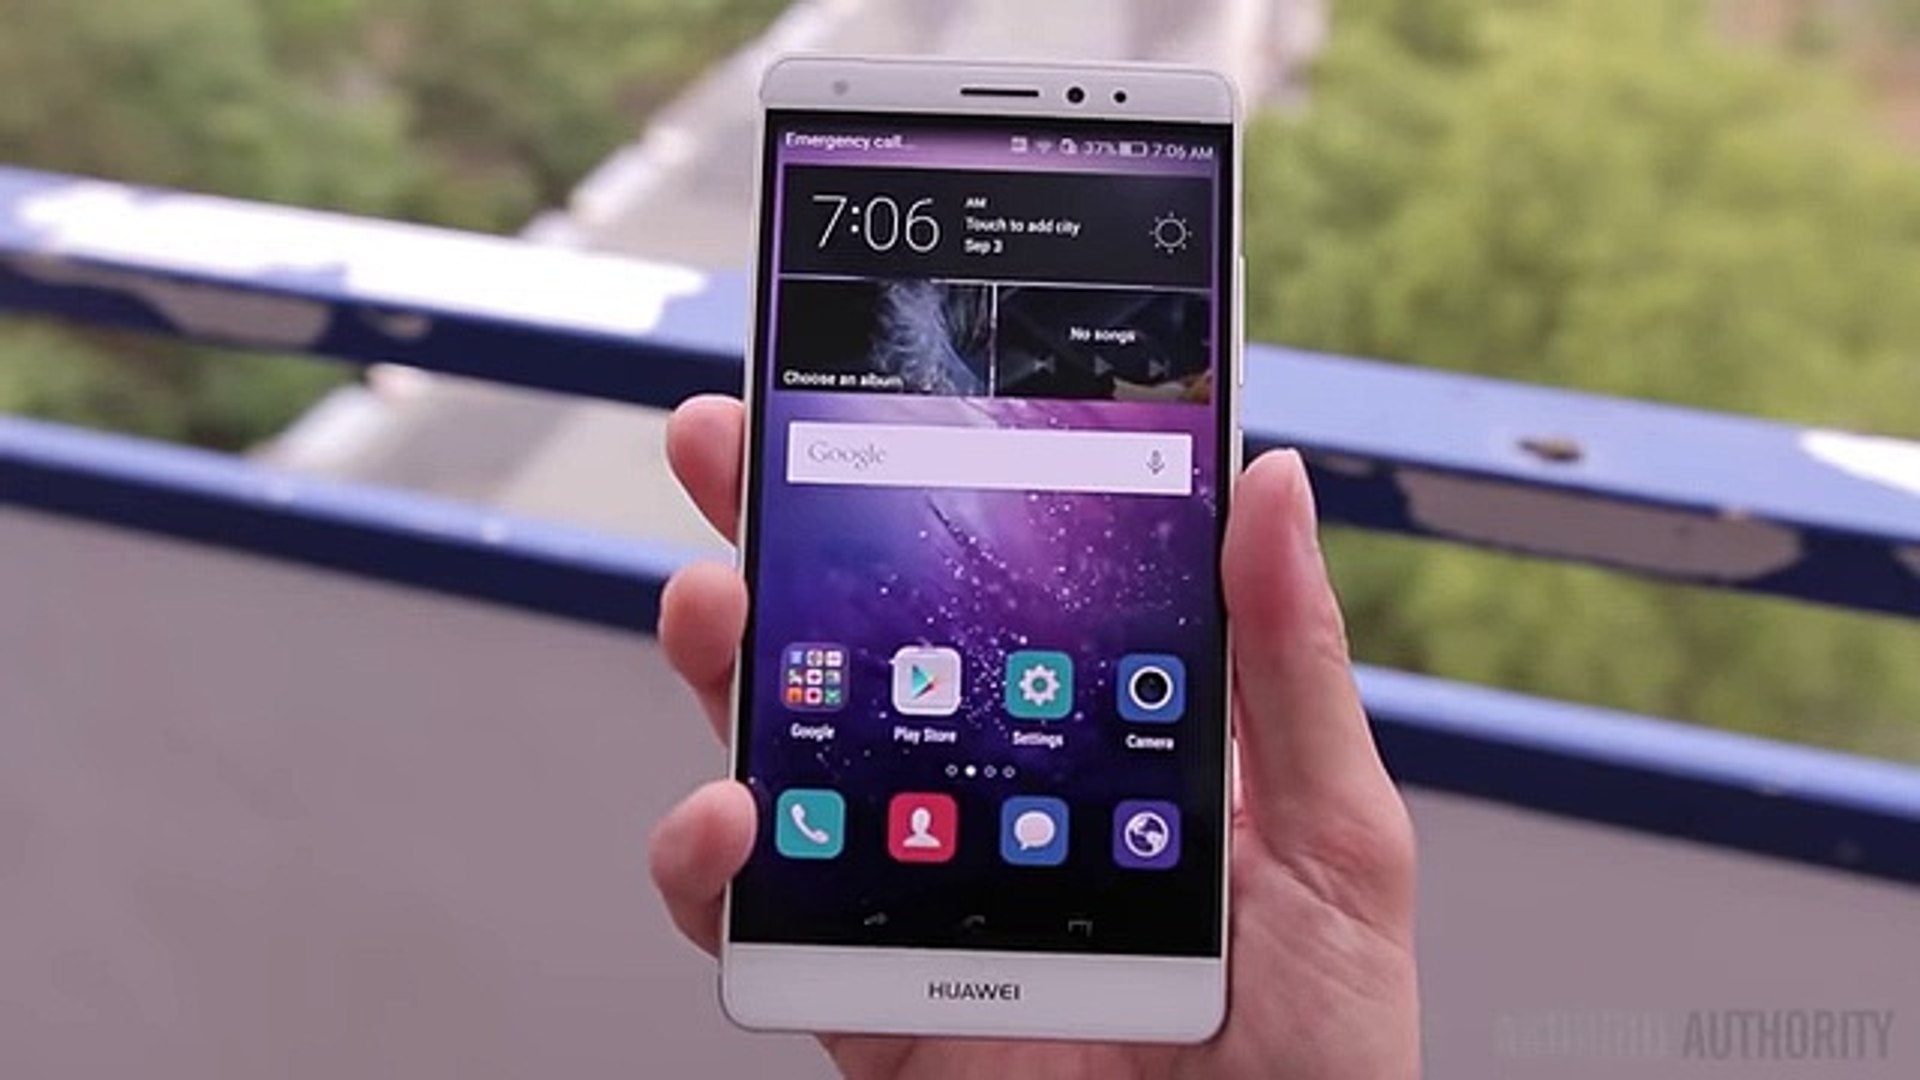 Huawei Mate S vs Samsung Galaxy Note 5 - video Dailymotion